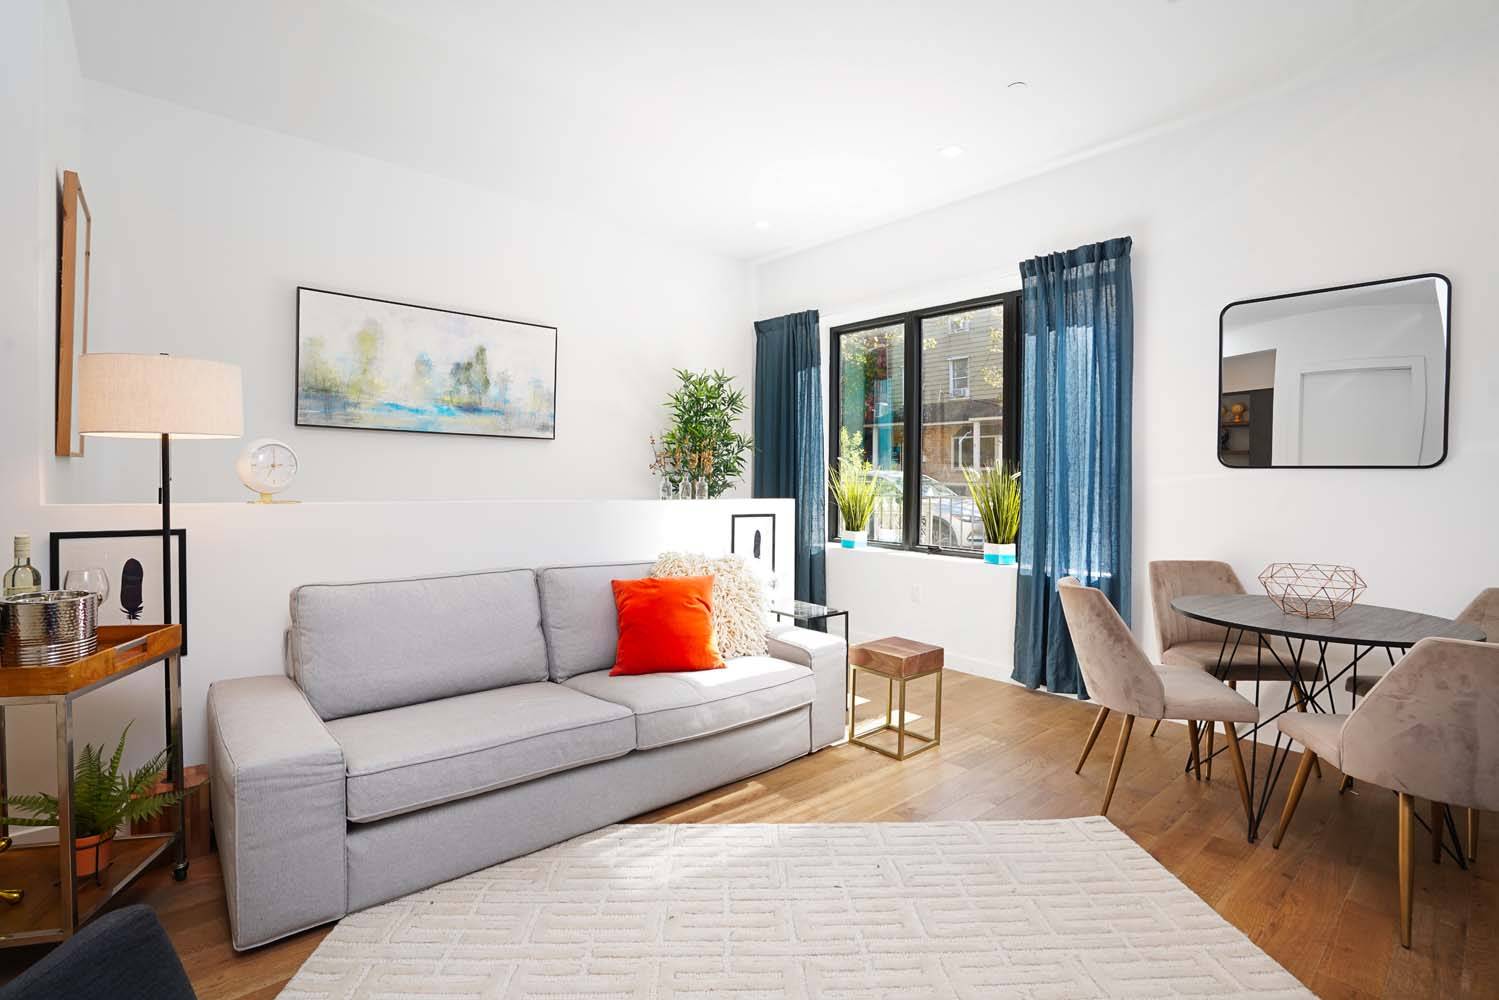 Your search for the perfect Brooklyn condominium can end at 99 Conselyea Street, a new boutique condo development in Williamsburg on a charming tree lined street that's surrounded by endless ...